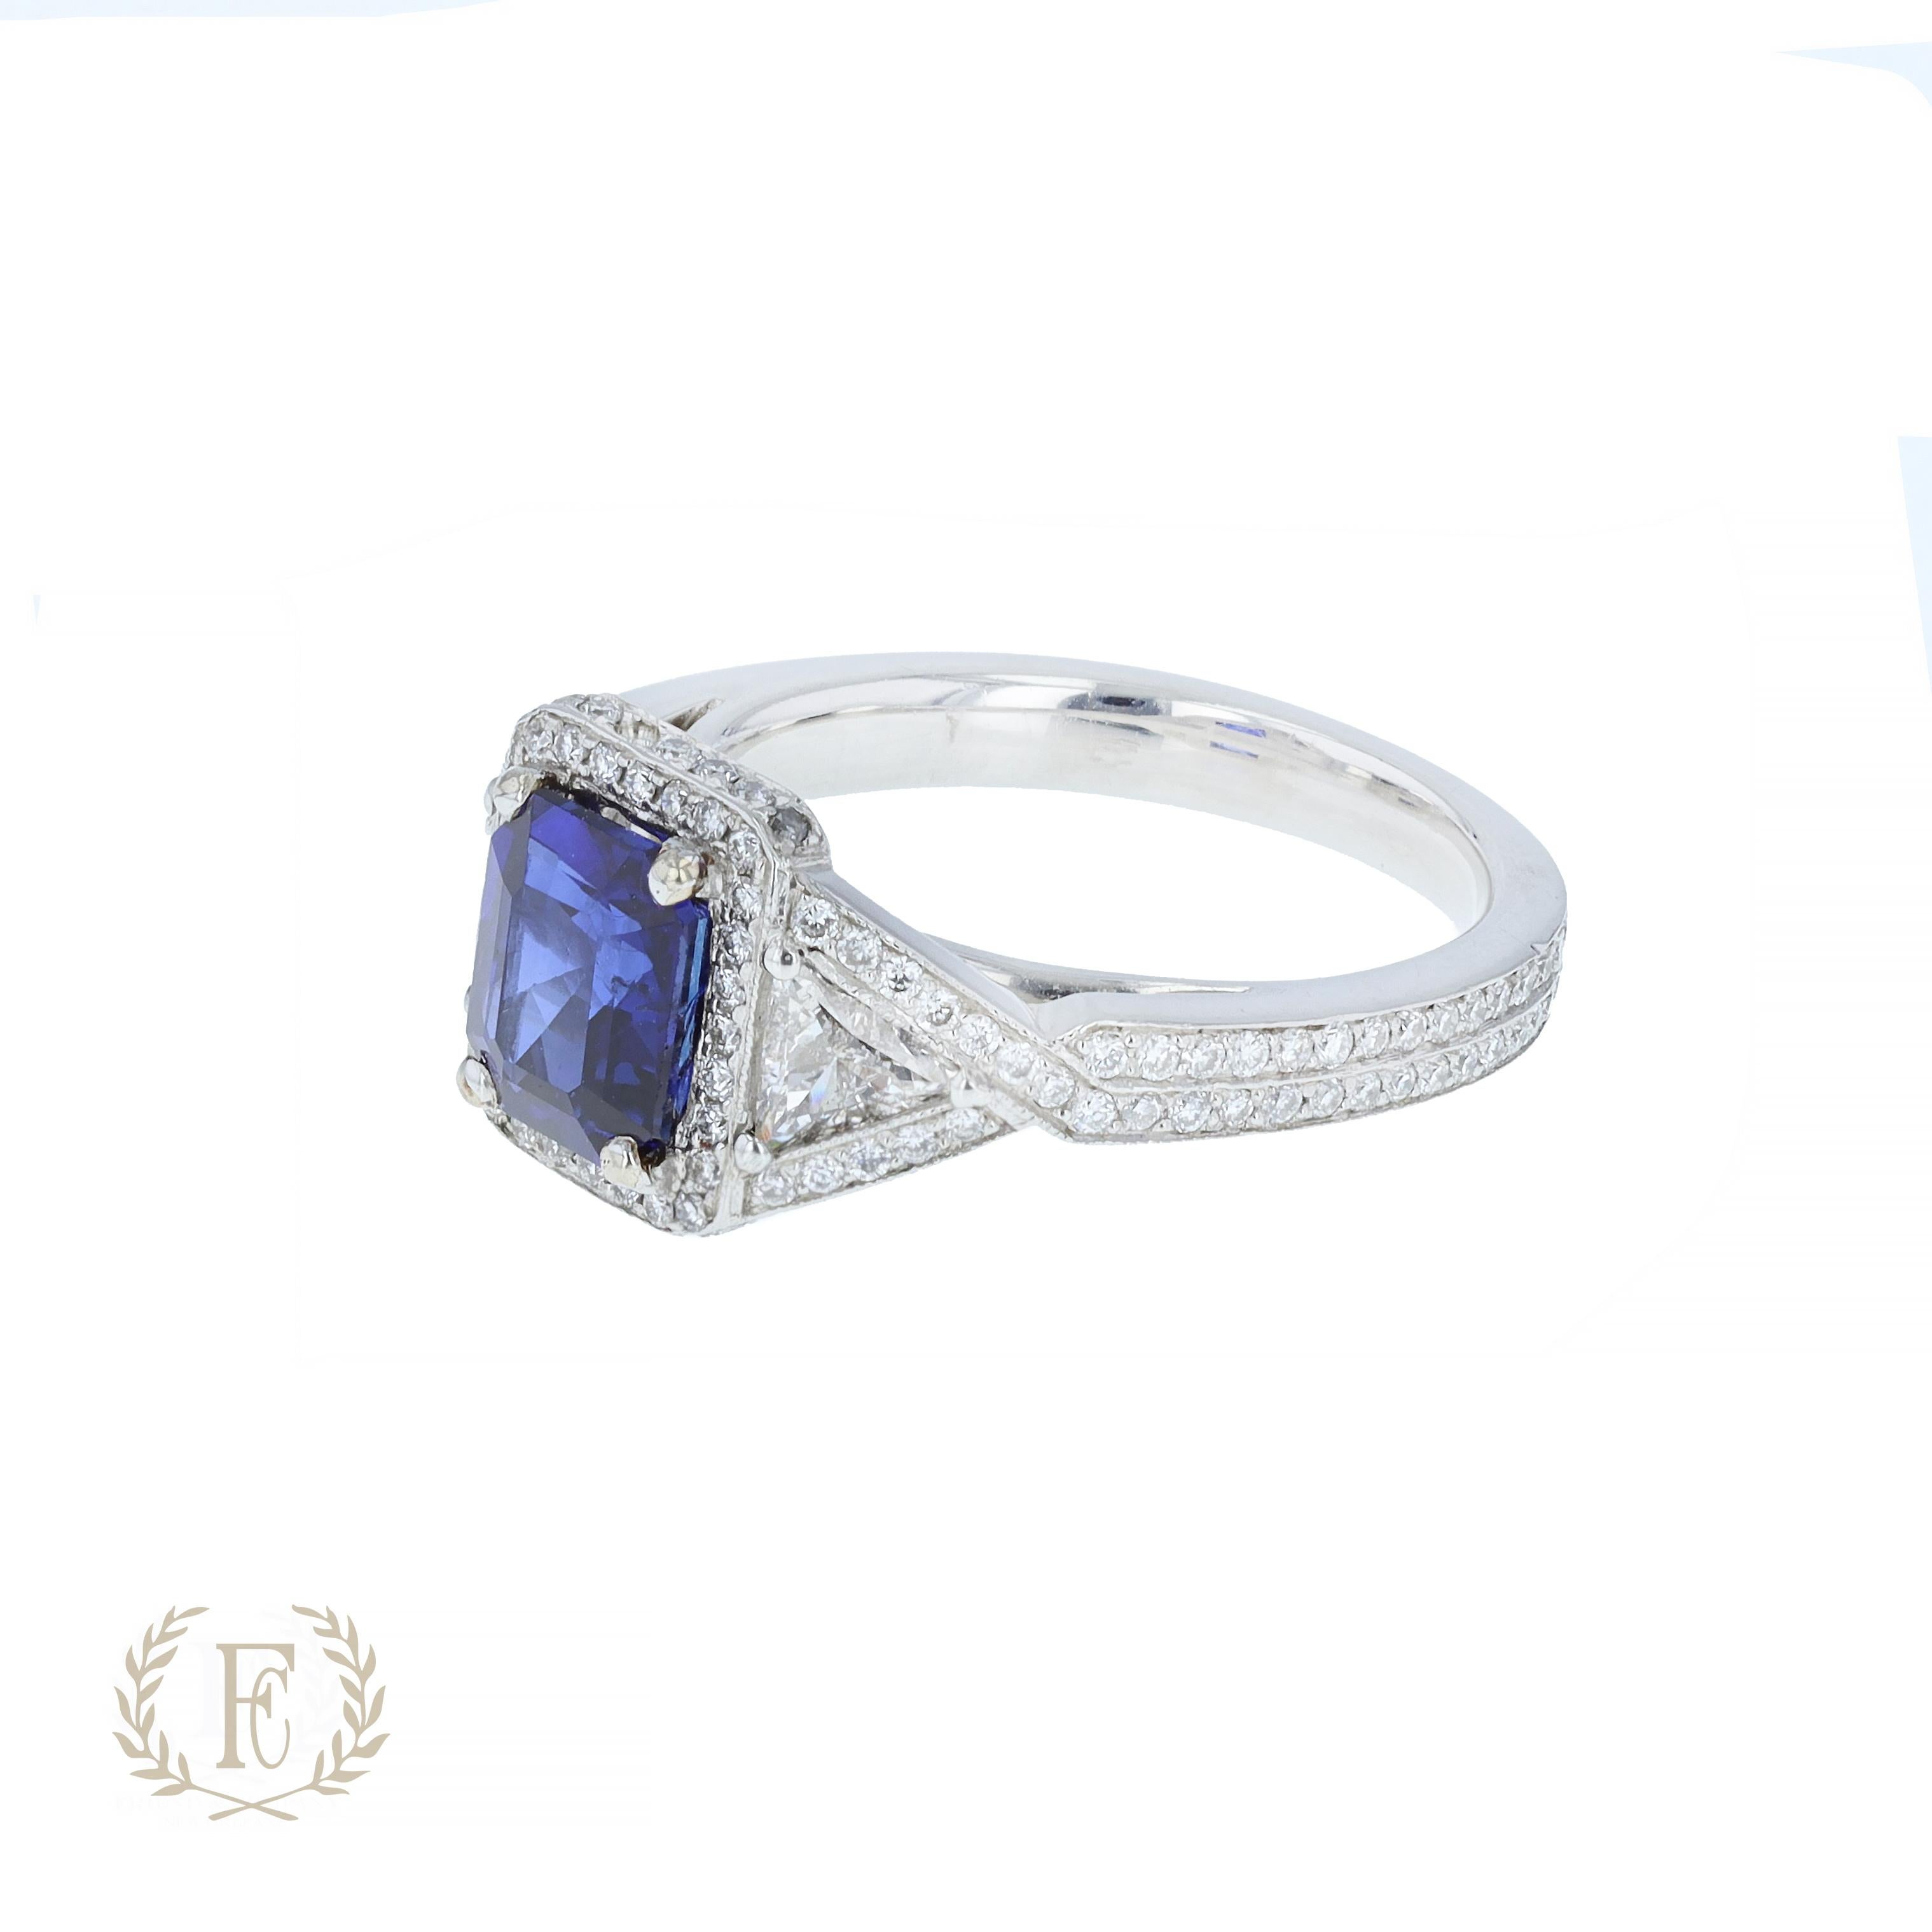 Platinum sapphire and diamond ring containing one emerald cut blue sapphire weighing 1.98 ctw and two trillion cut diamonds weighing  .60 ctw and 146 round diamonds.